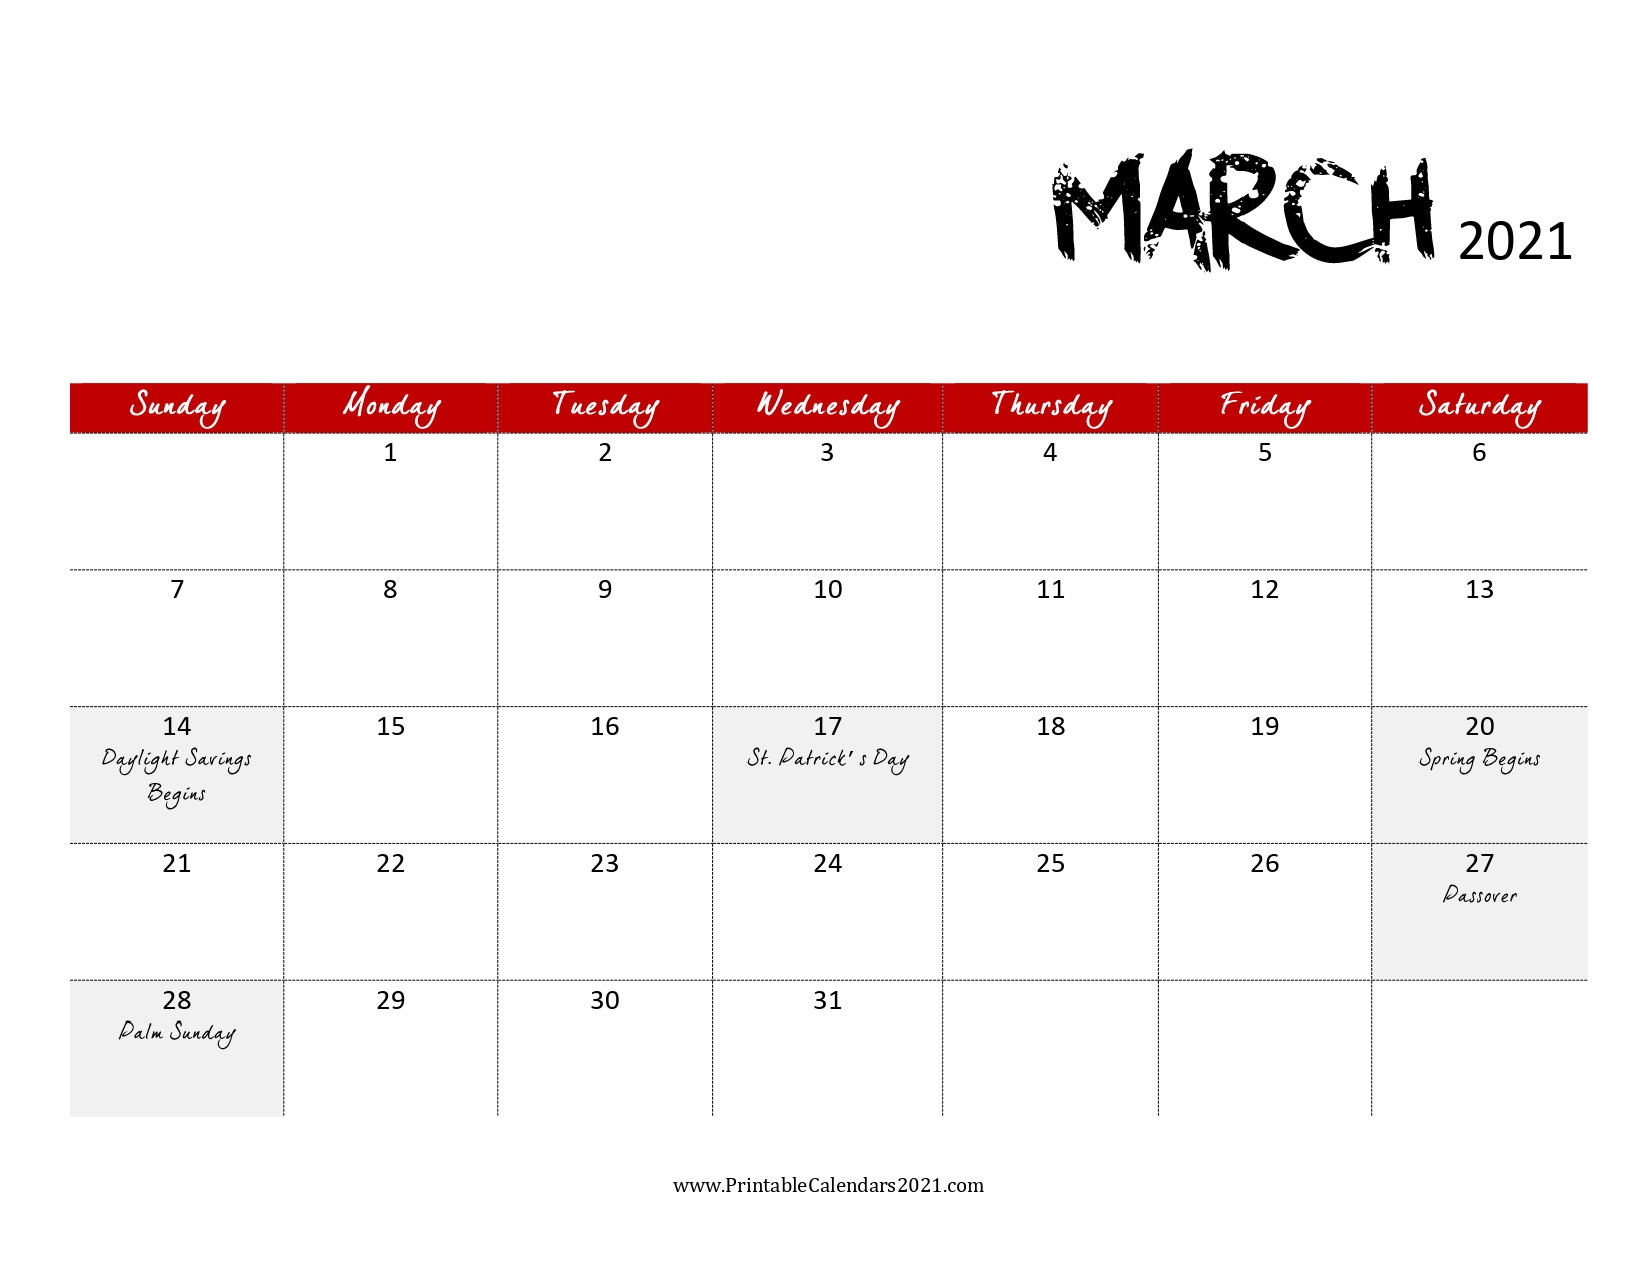 68+ Free March 2021 Calendar Printable With Holidays-2021 Calendar Printable Free Pdf March